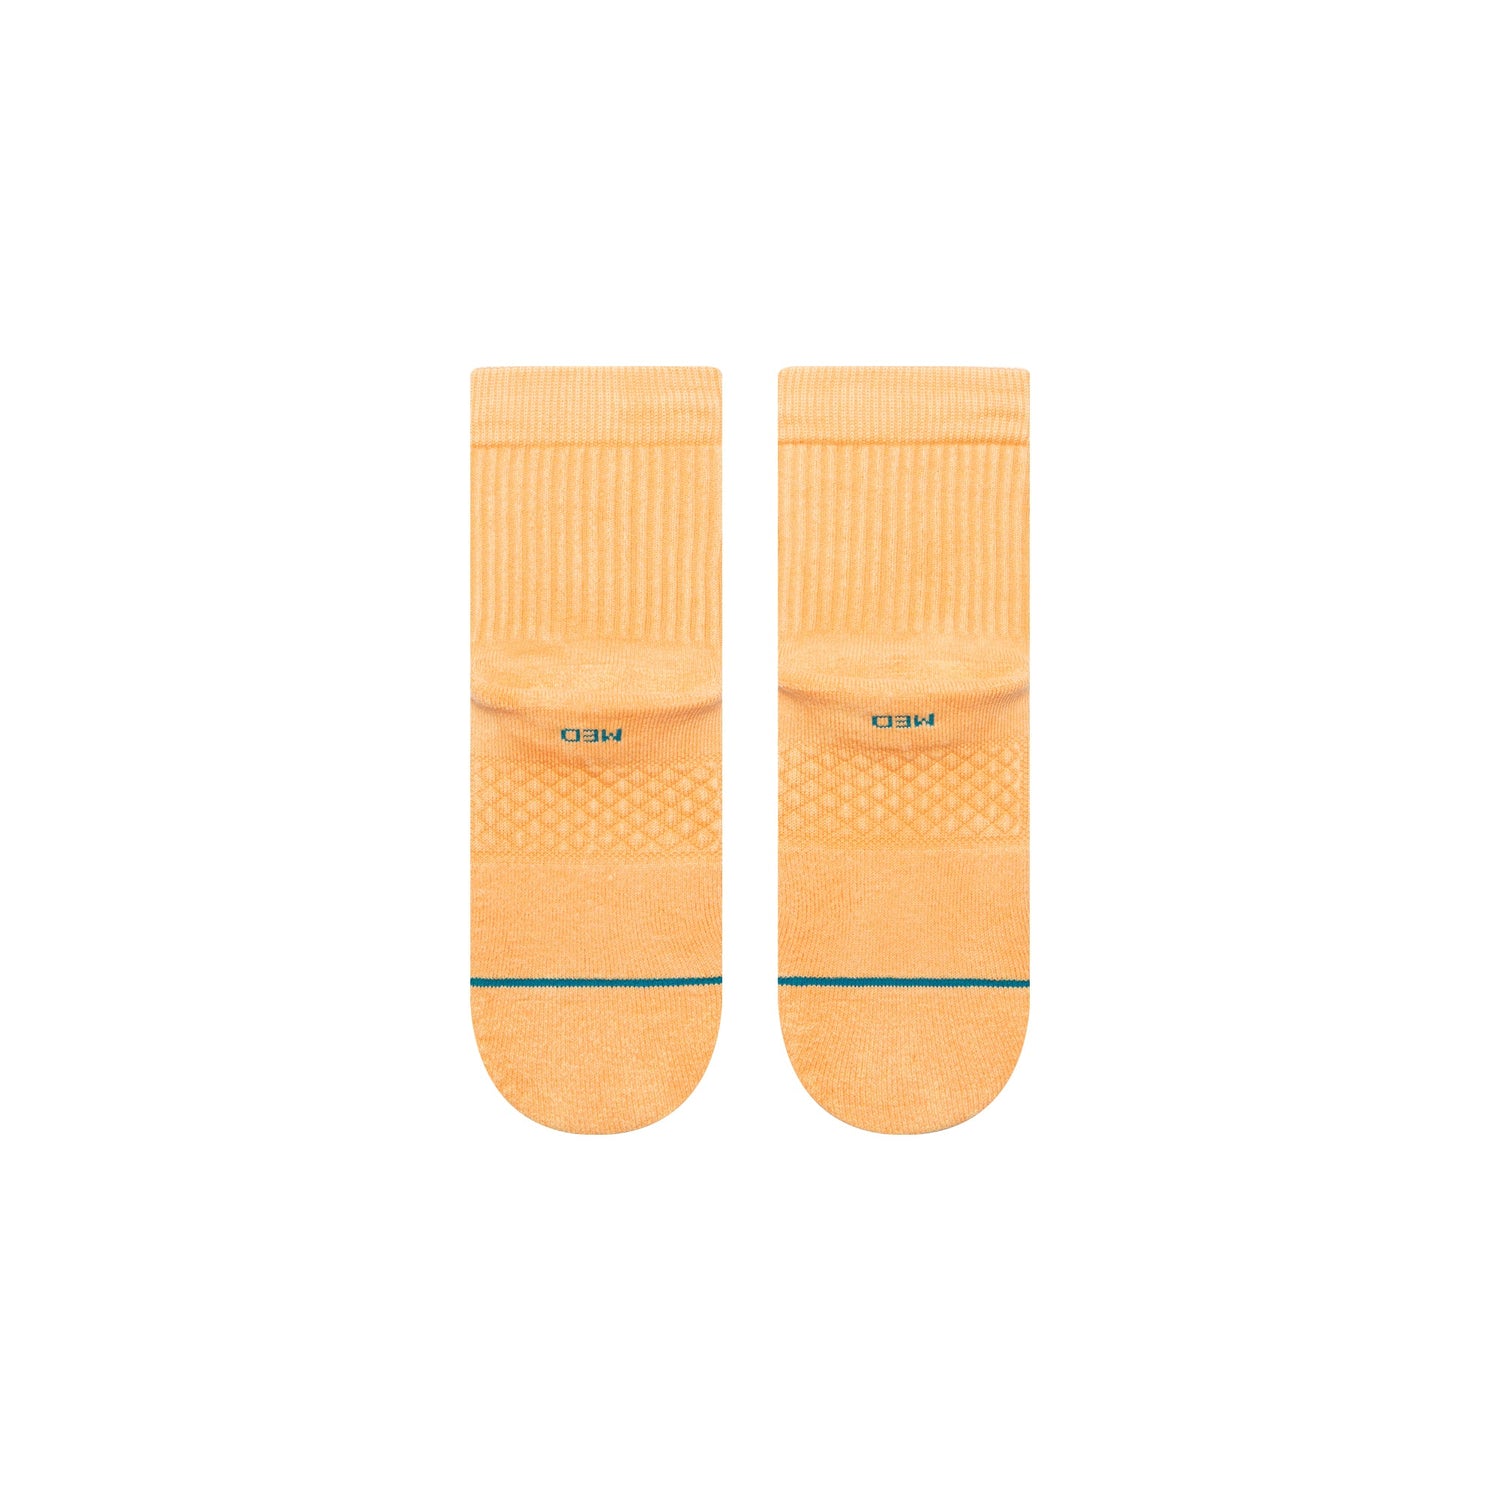 Stance Icon Washed Quarter Sock Peach